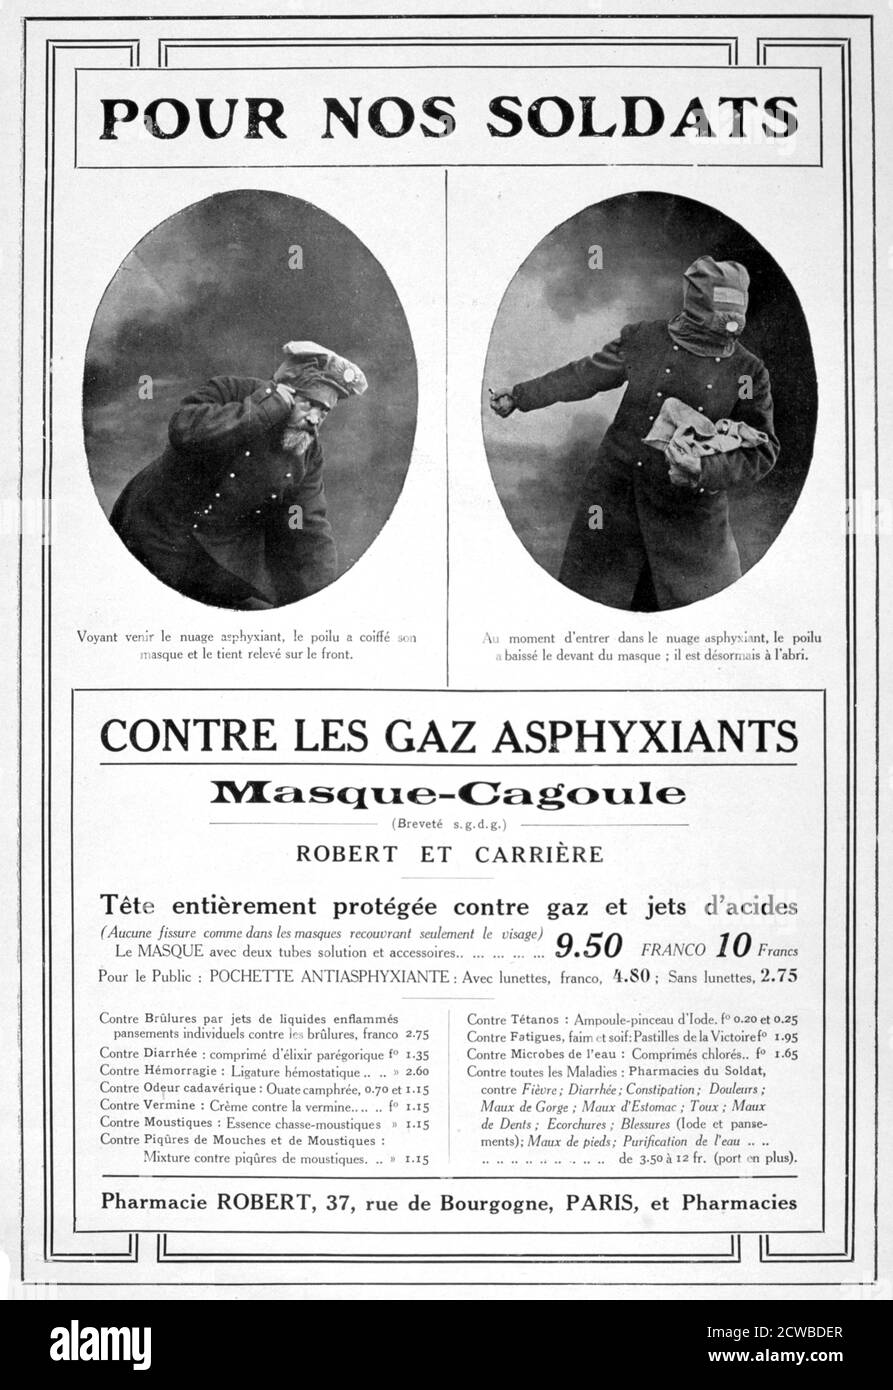 Masque cagoule (Gas mask) advertisement, 1915. A print from 'Le Flambeau' (the Torch), 18th September 1915. The artist is unknown. Stock Photo